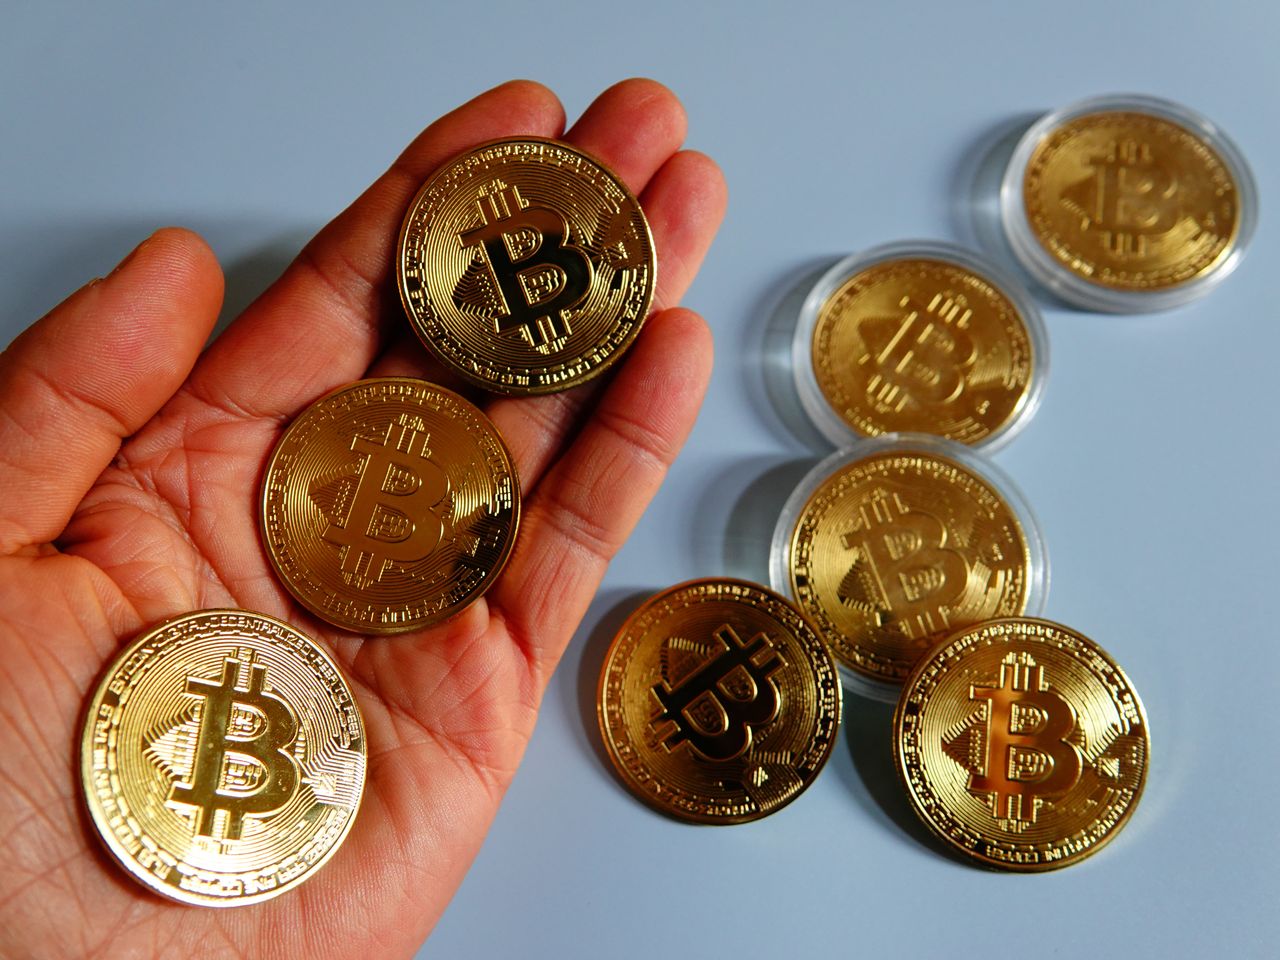 U.S. Regulators Greenlight Bitcoin. A Historic Move Sparking 8-13% Boost in cryptocurrency values